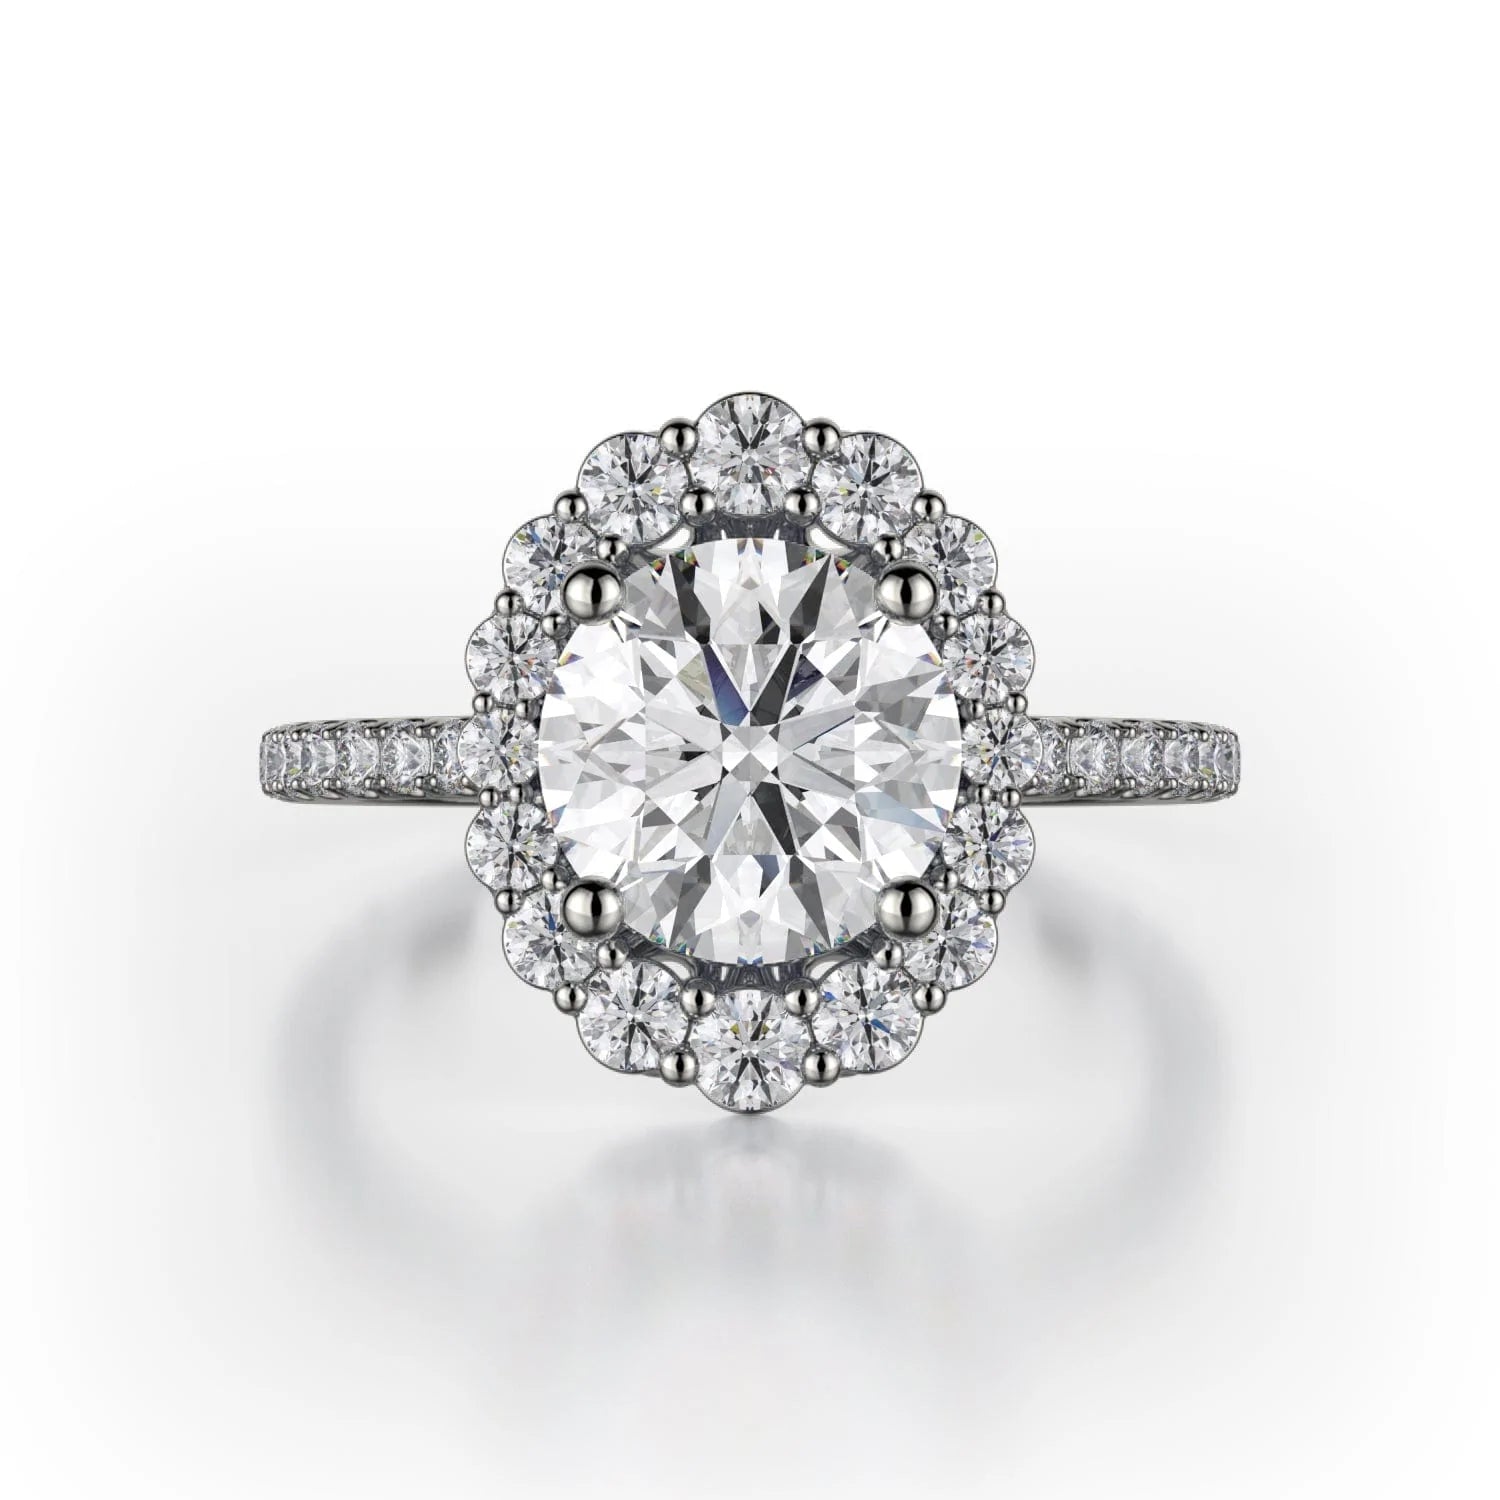 MICHAEL M Engagement Rings 18K White Gold DEFINED R739 Brilliant Round with a Graduated Halo R739-1.5WG